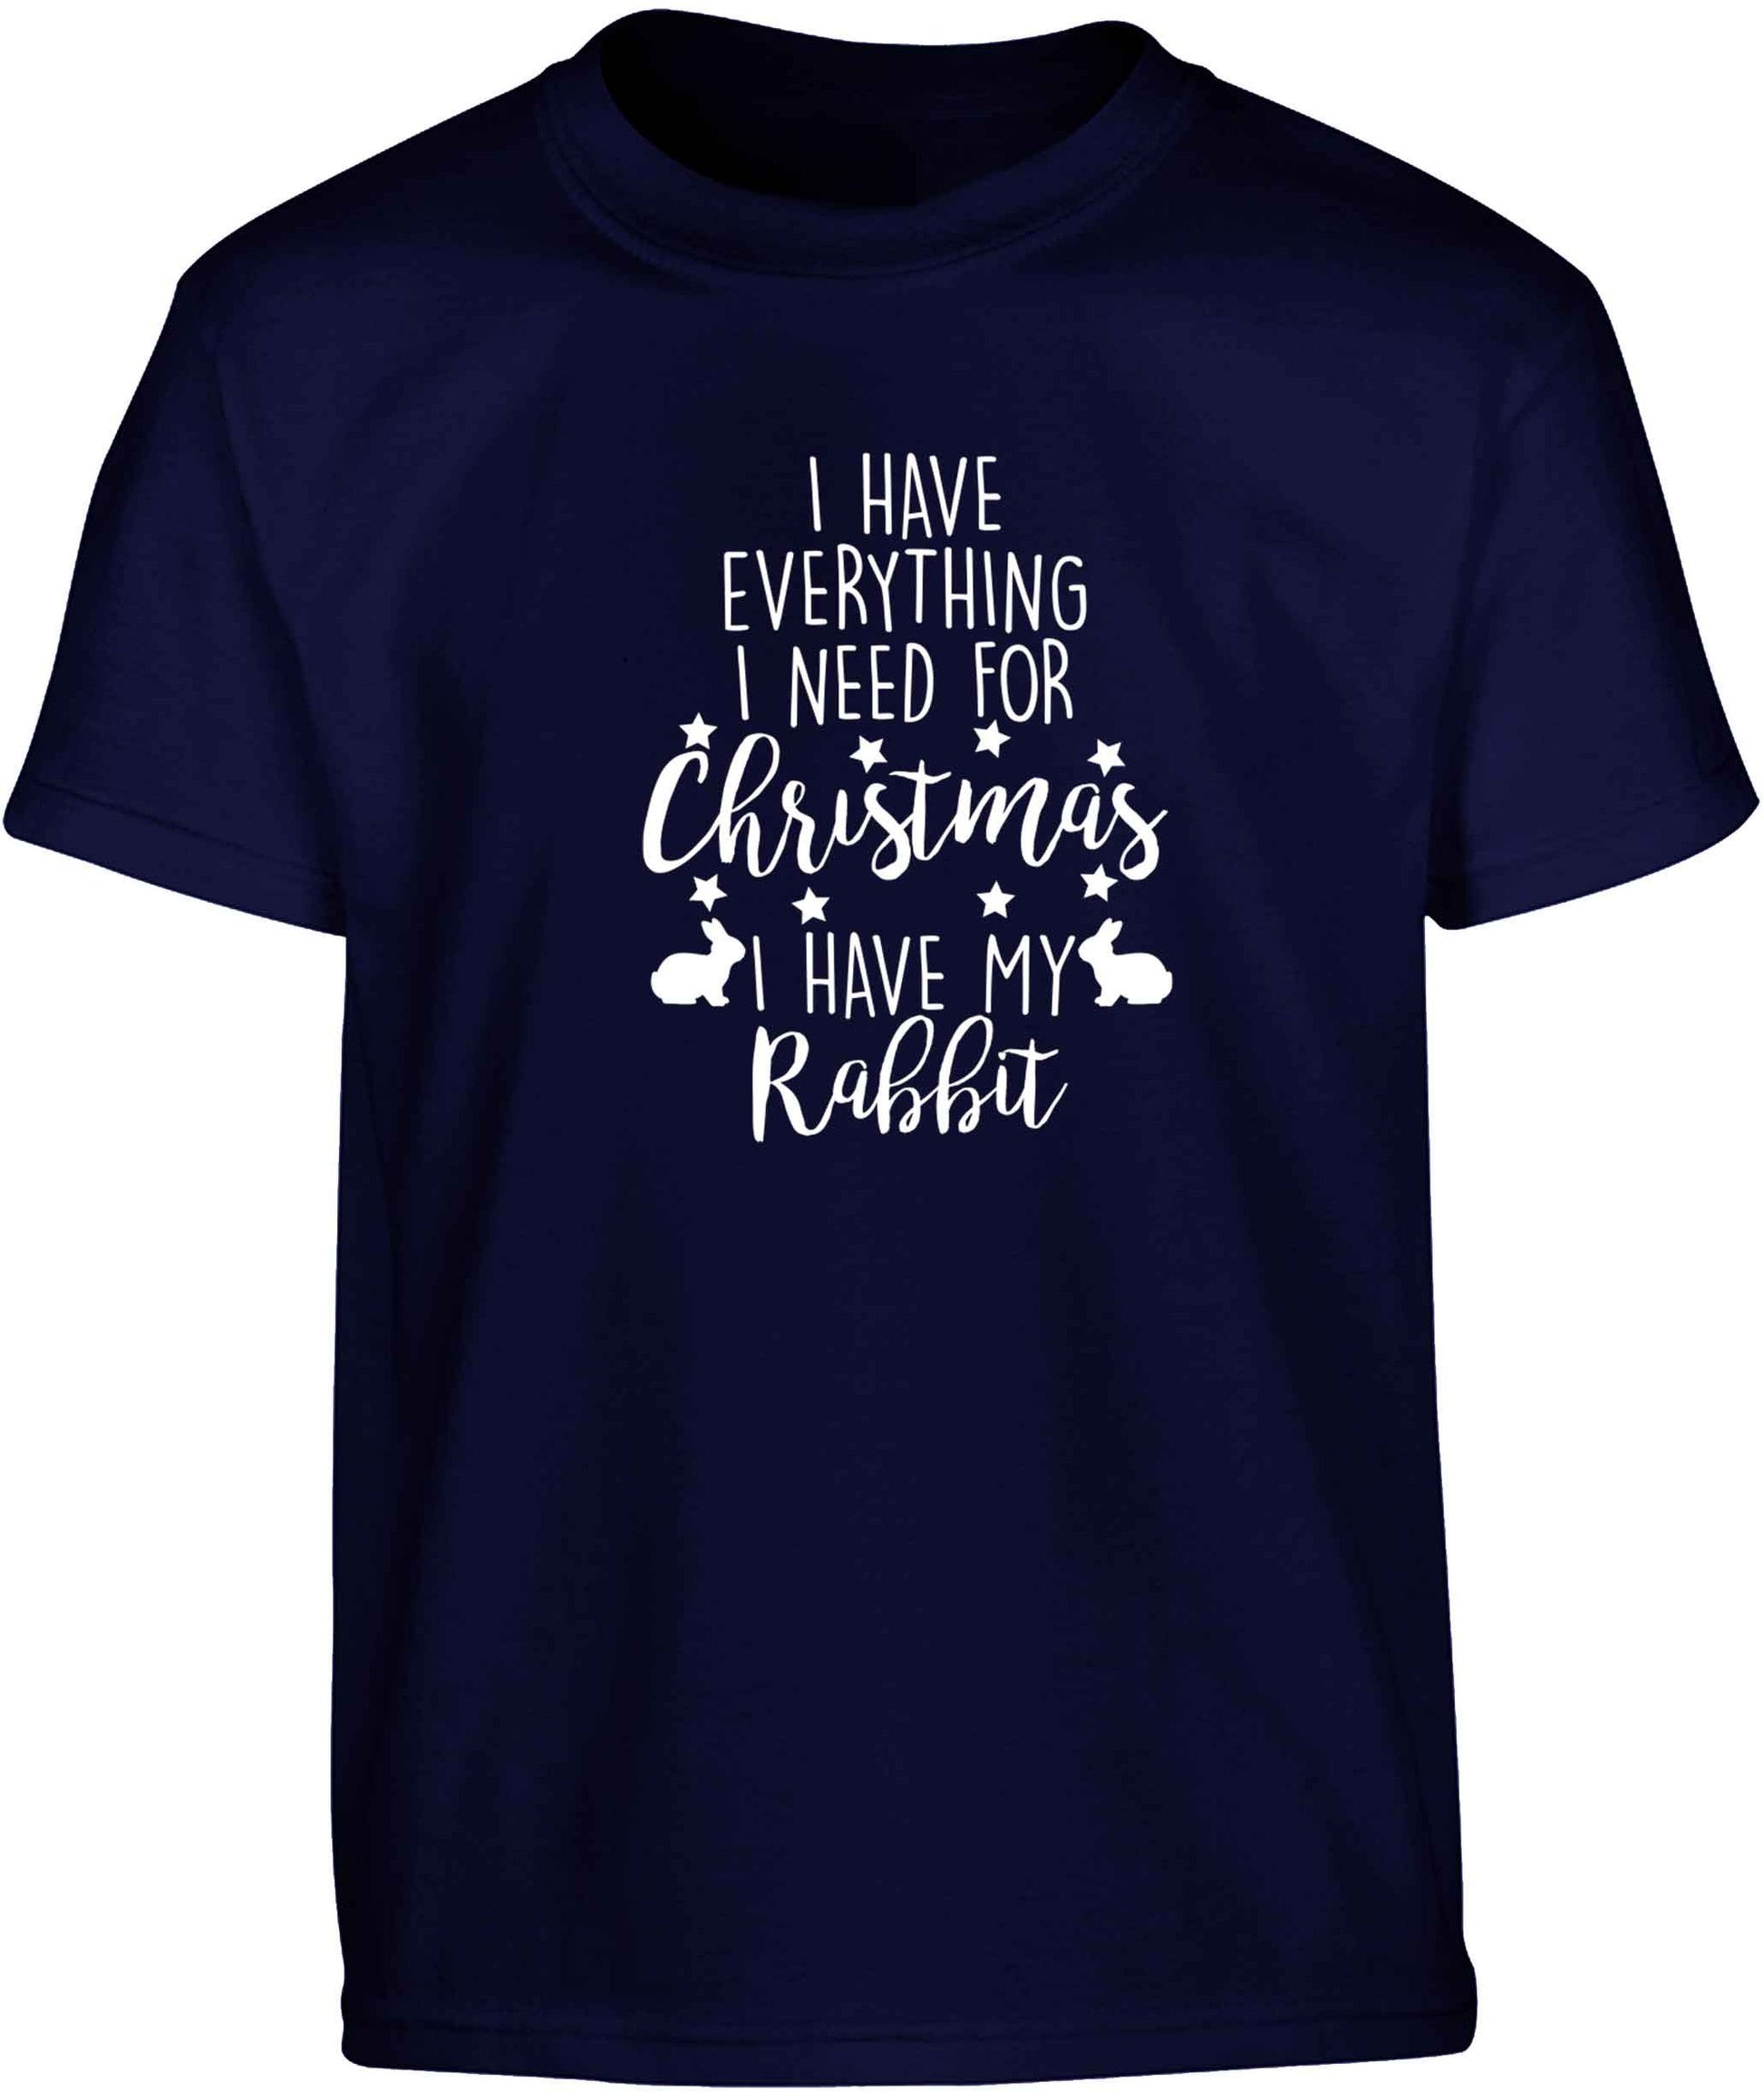 I have everything I need for Christmas I have my rabbit Children's navy Tshirt 12-13 Years